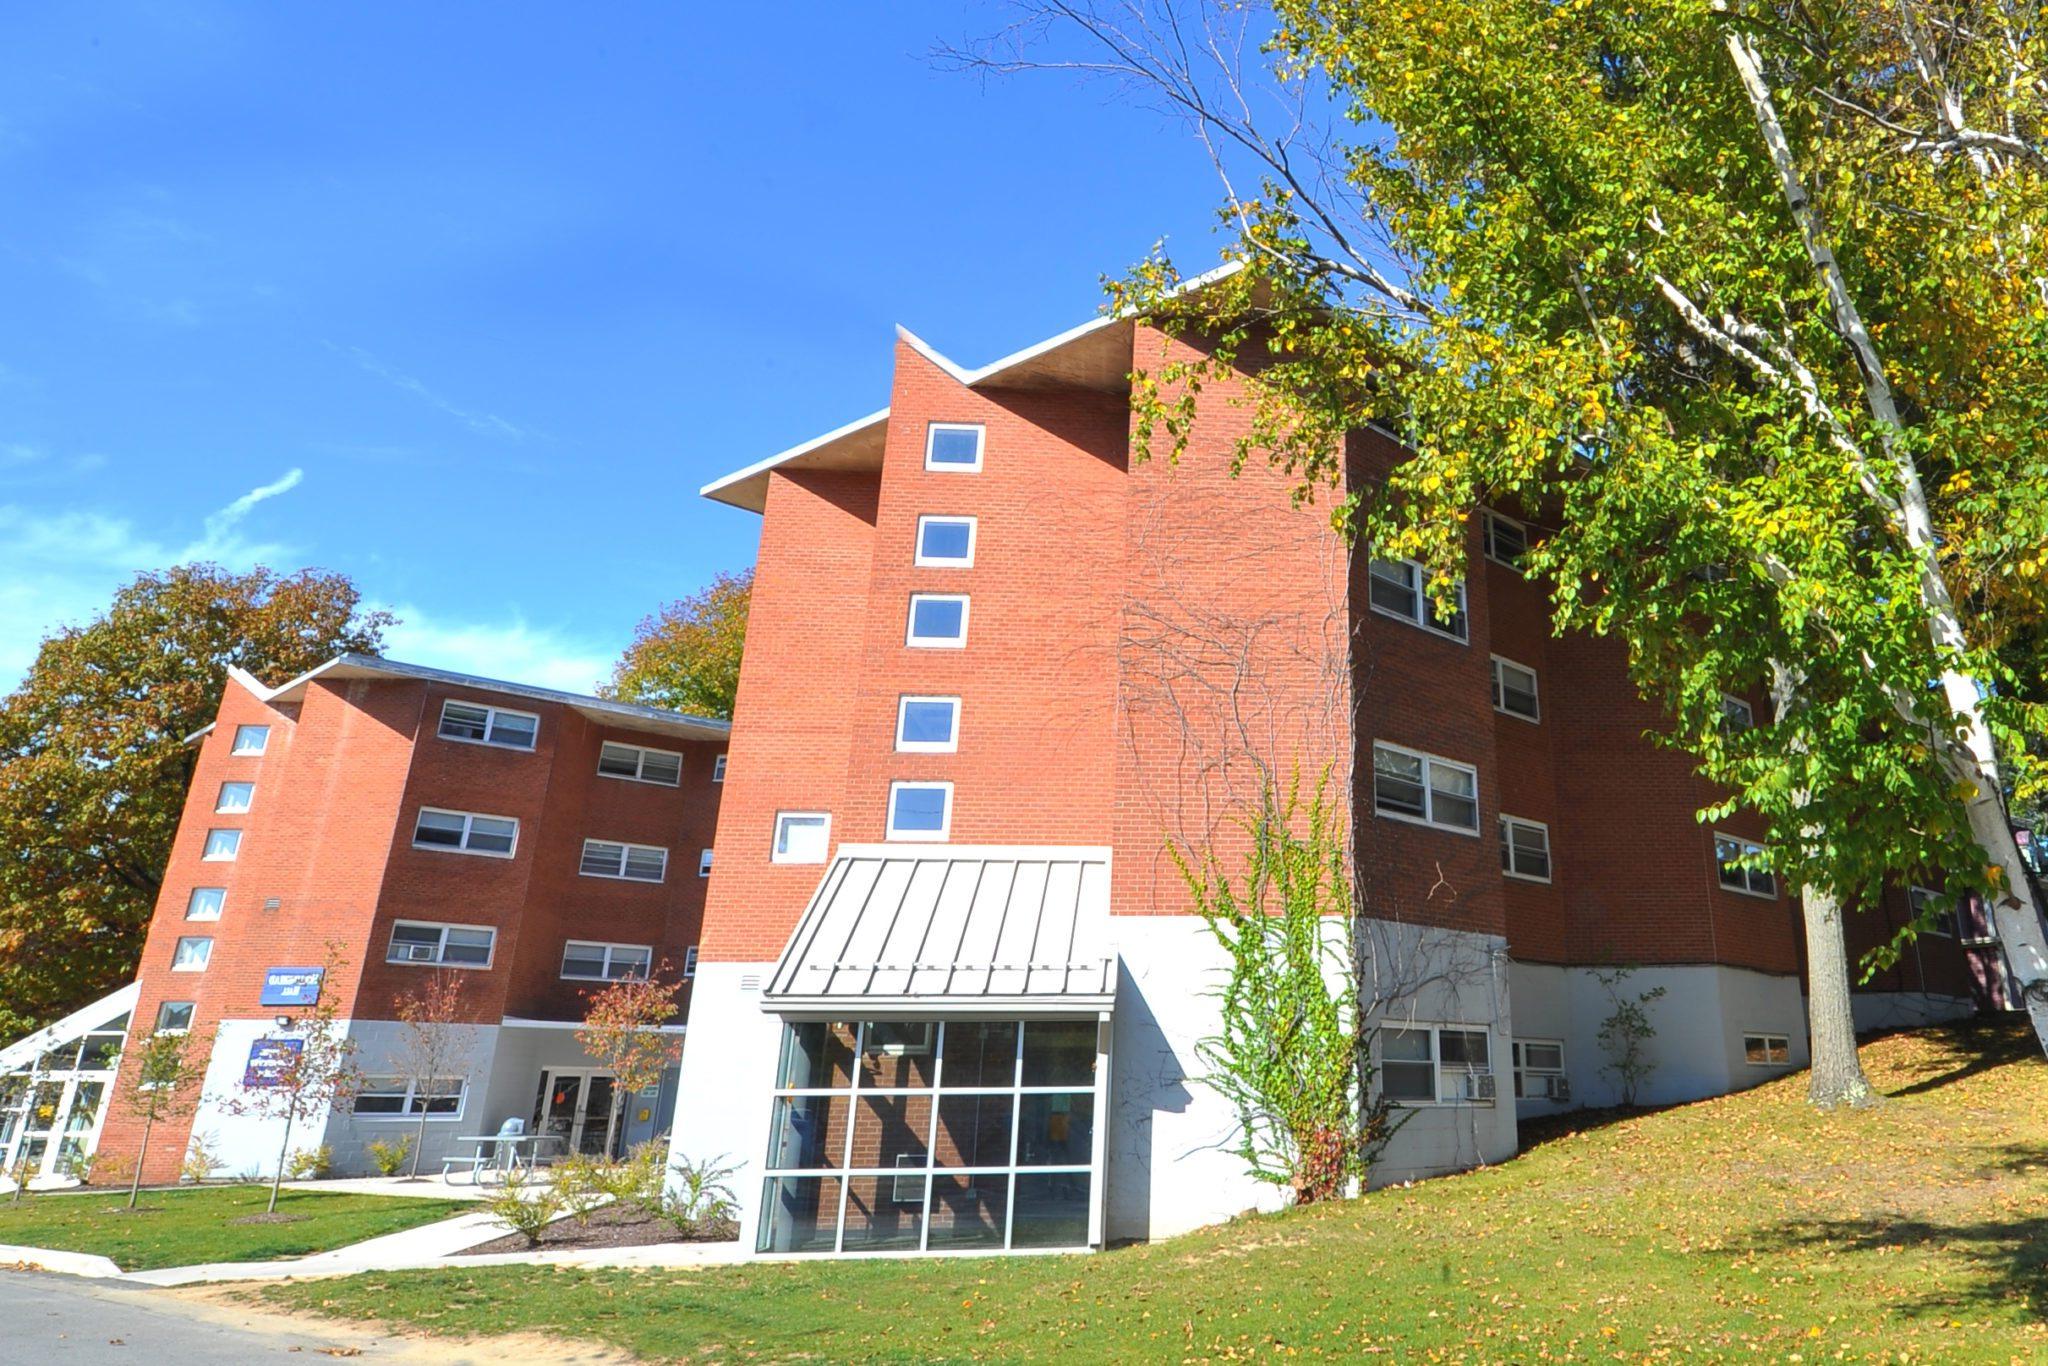 Two brick residence halls with windows and glass entryway at Keystone College